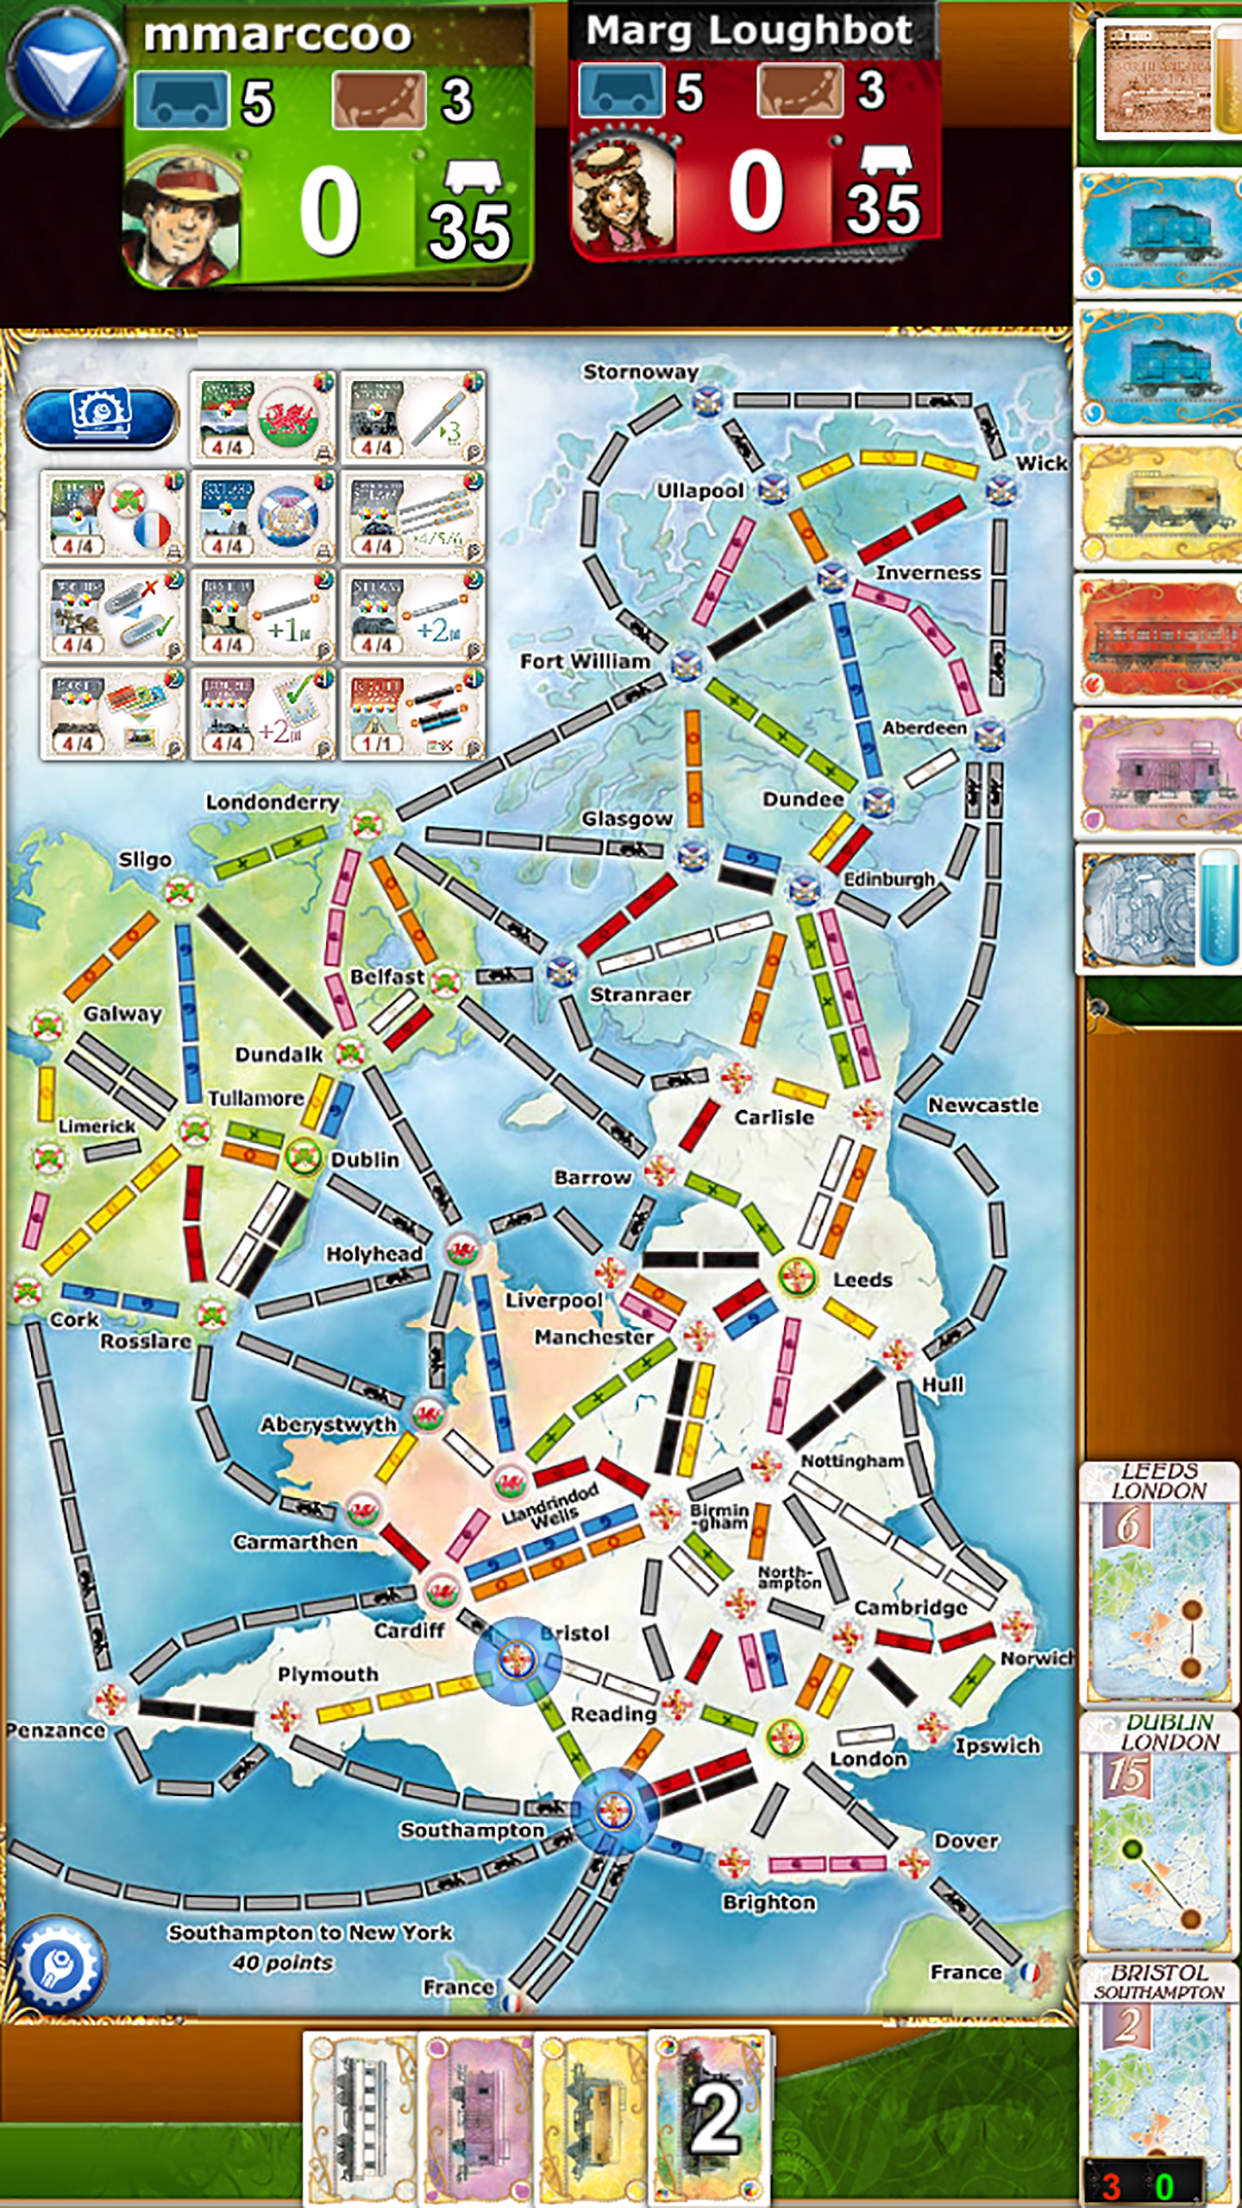 ticket to ride expansion pack